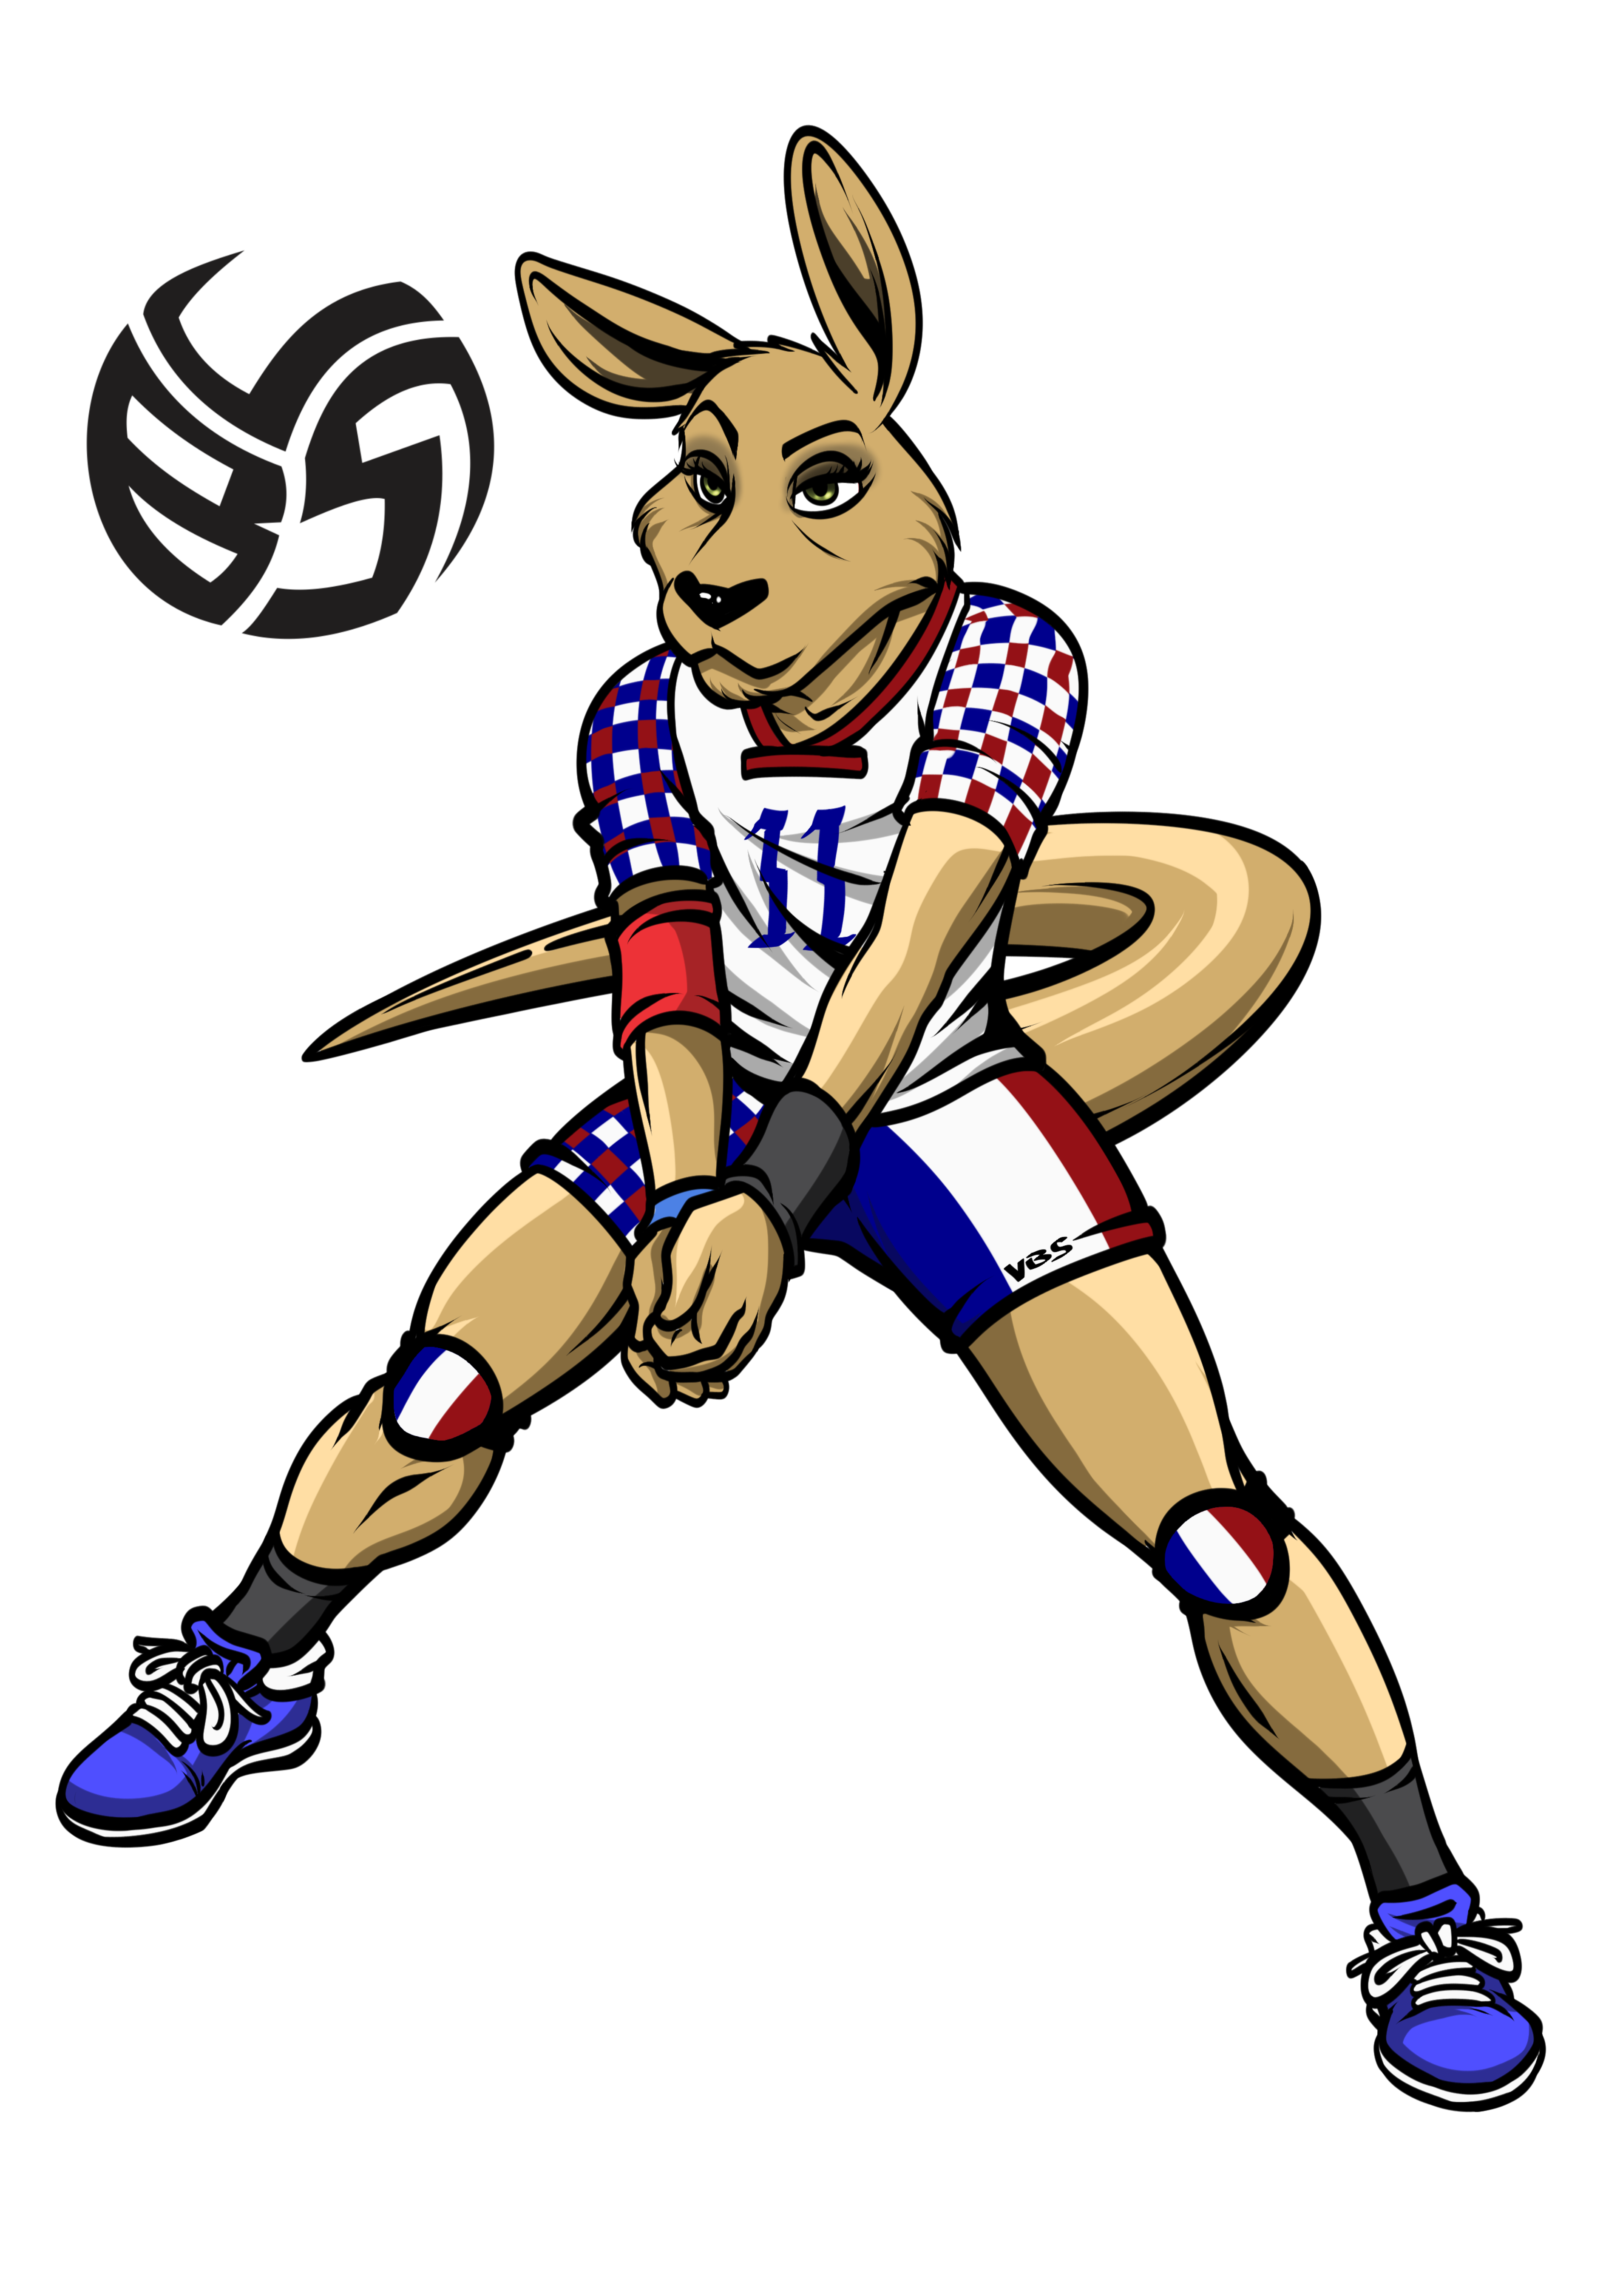 Volleybragswag Volleyball T Shirt Designs Feature Left Side Hitter Resee The Kangaroo, click to shop Resee in the Tokyo Olympics inspired France uniform.